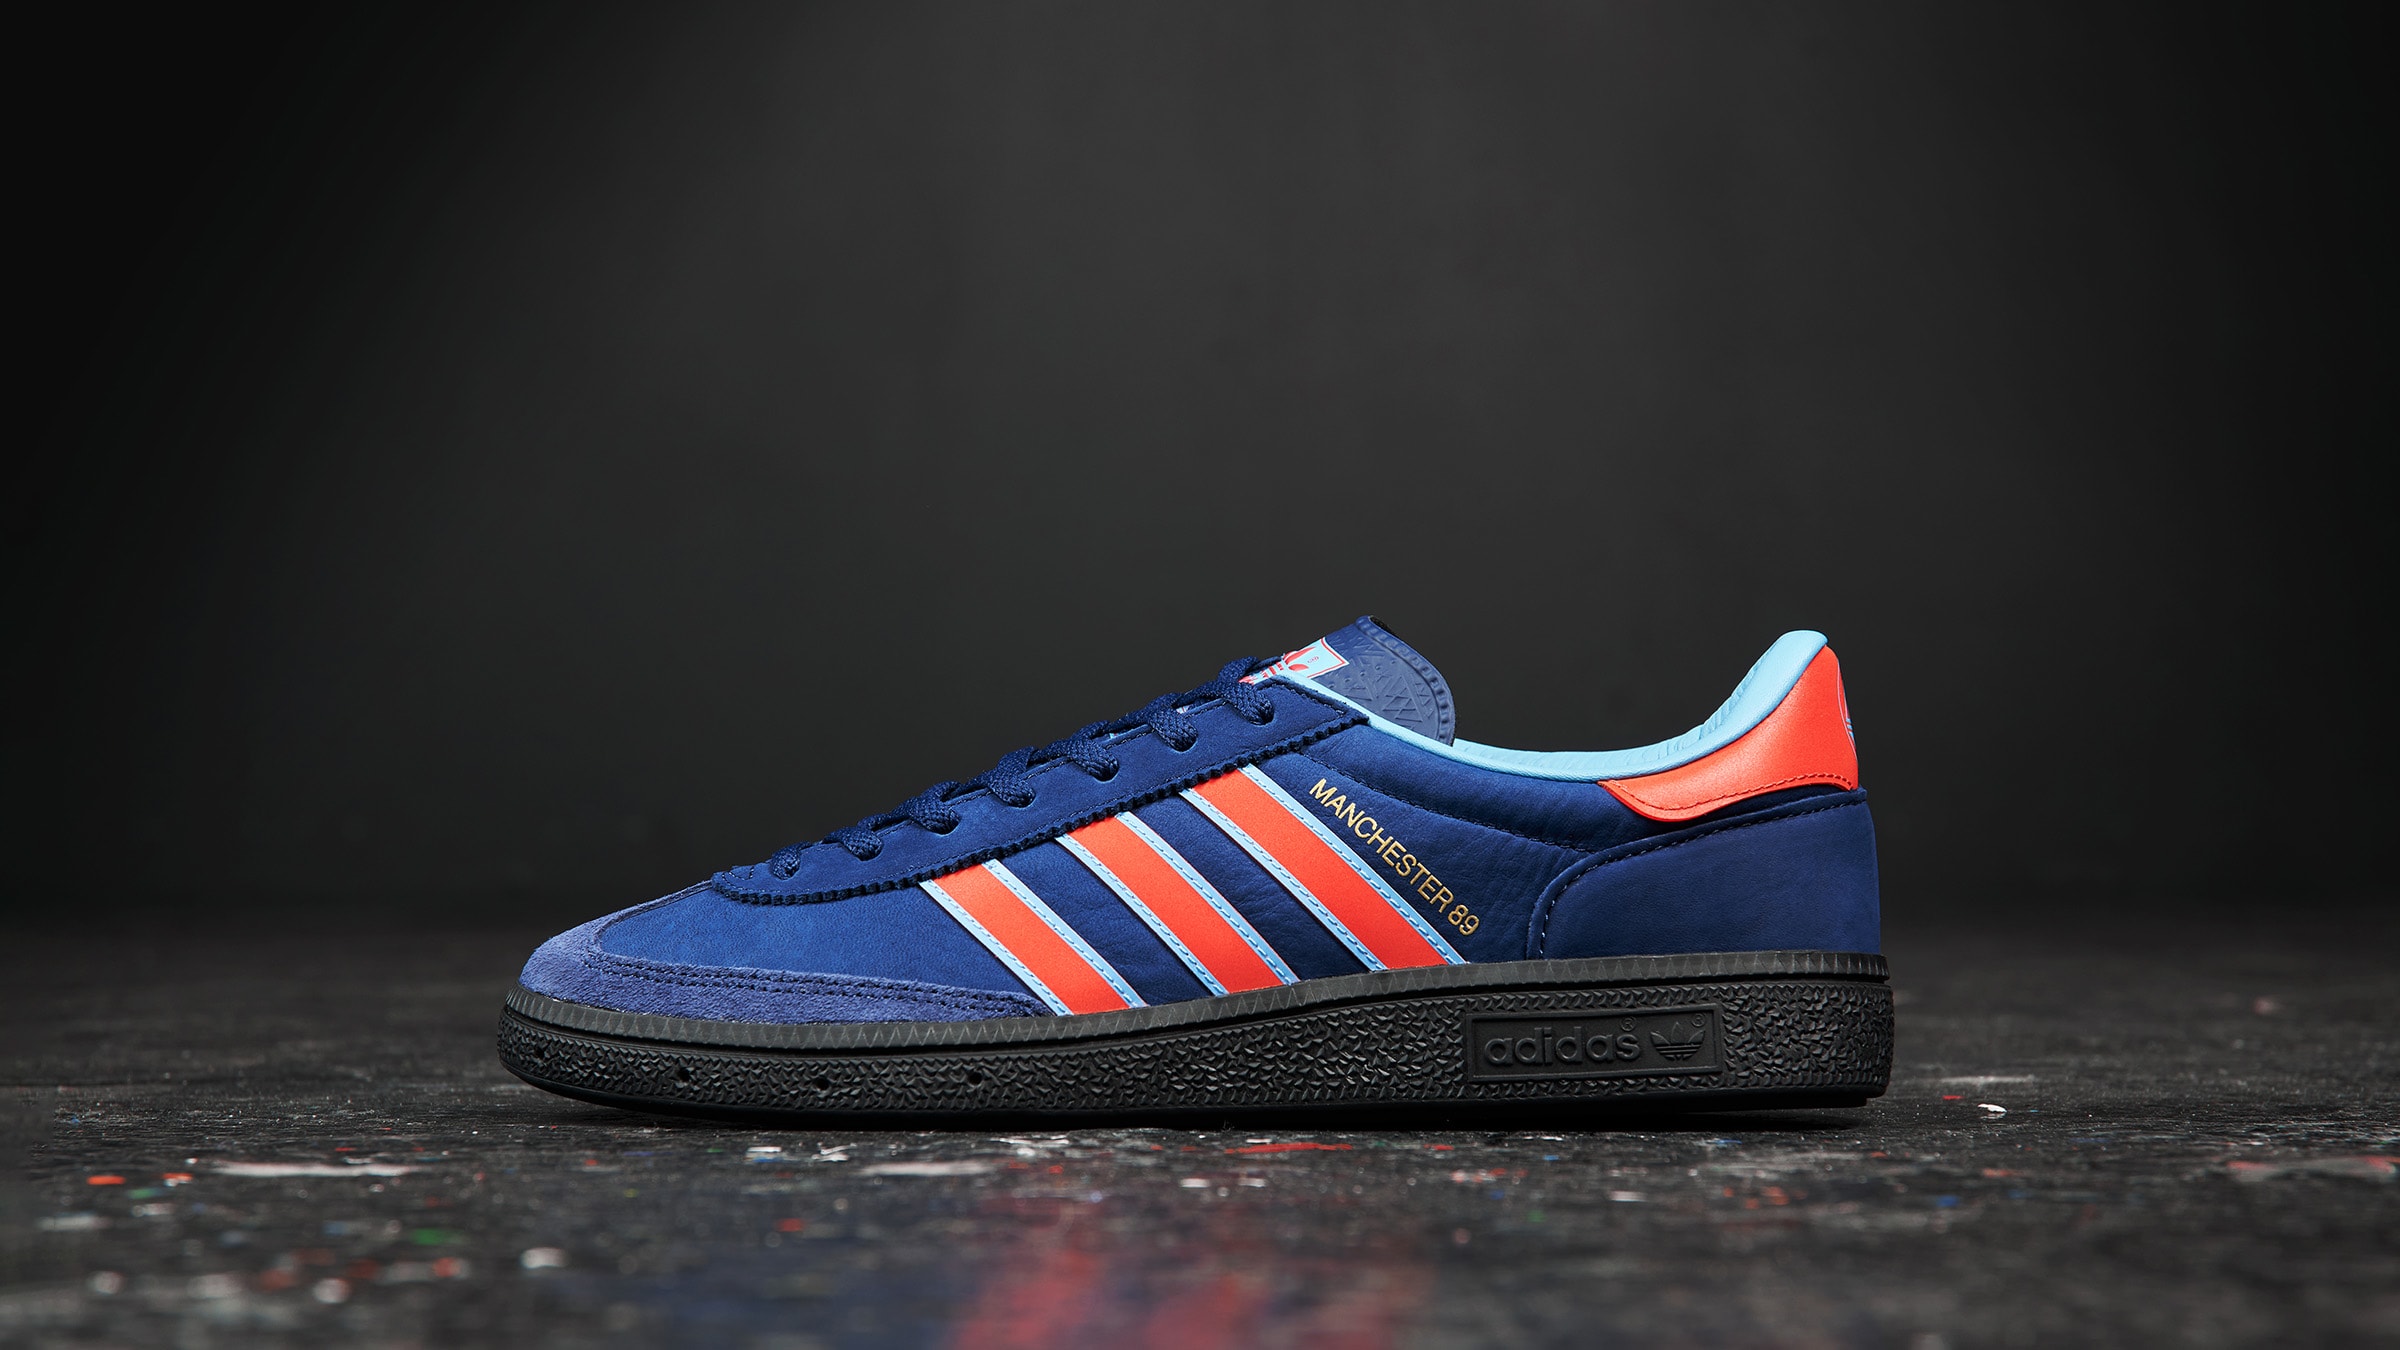 Adidas Manchester 89 SPZL (Bright Red & Blue) | END. Launches